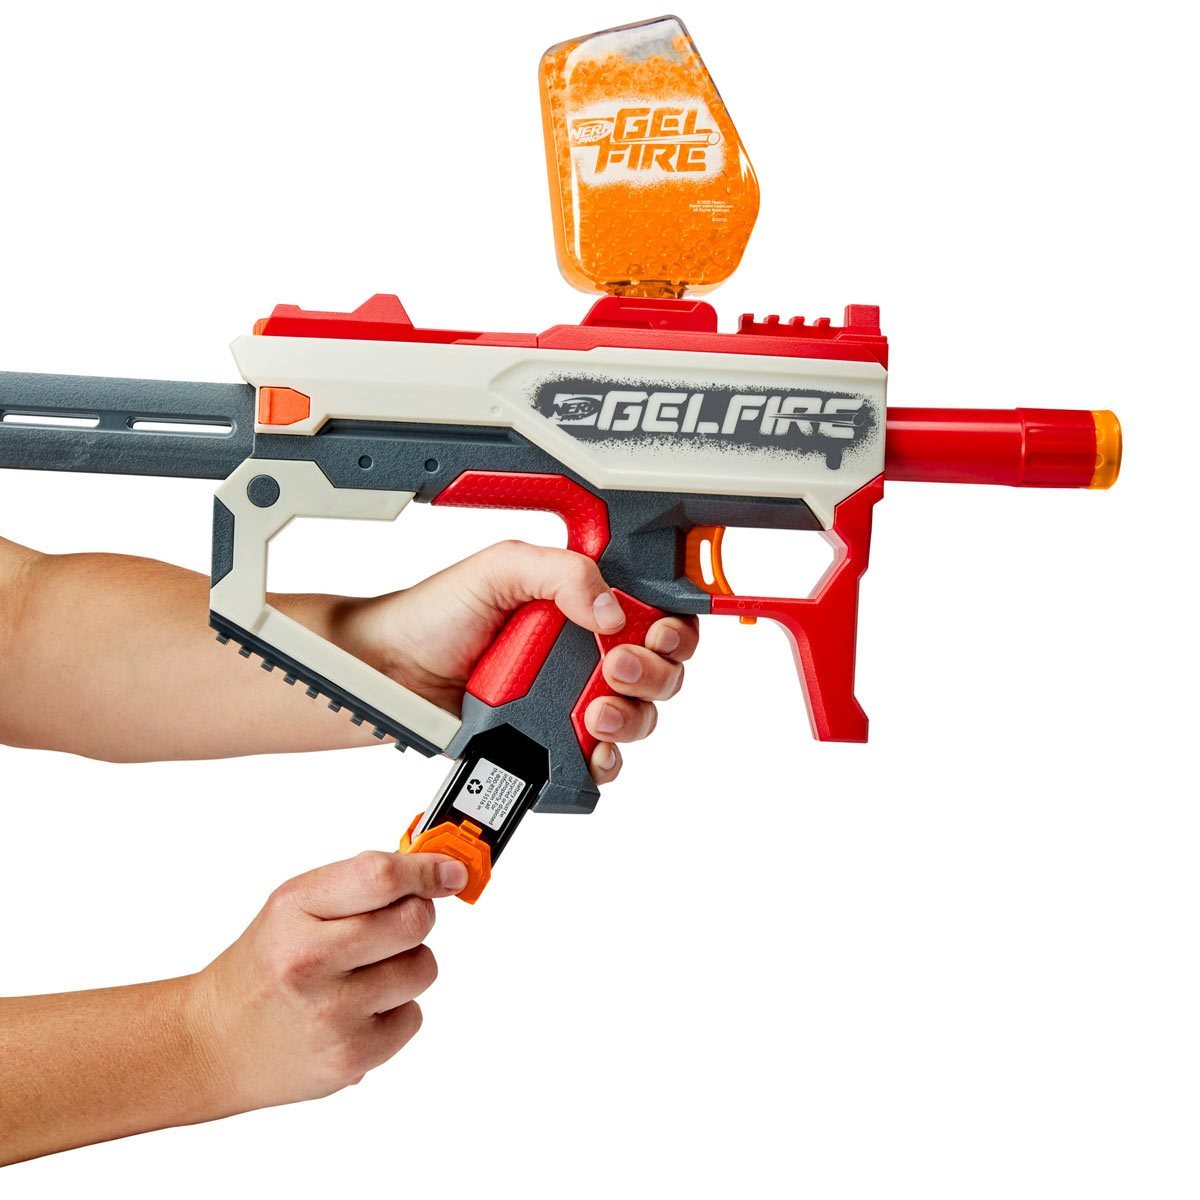 Nerf Pro Gelfire Mythic Full Auto Blaster - Fires 10 Rounds Per Second!